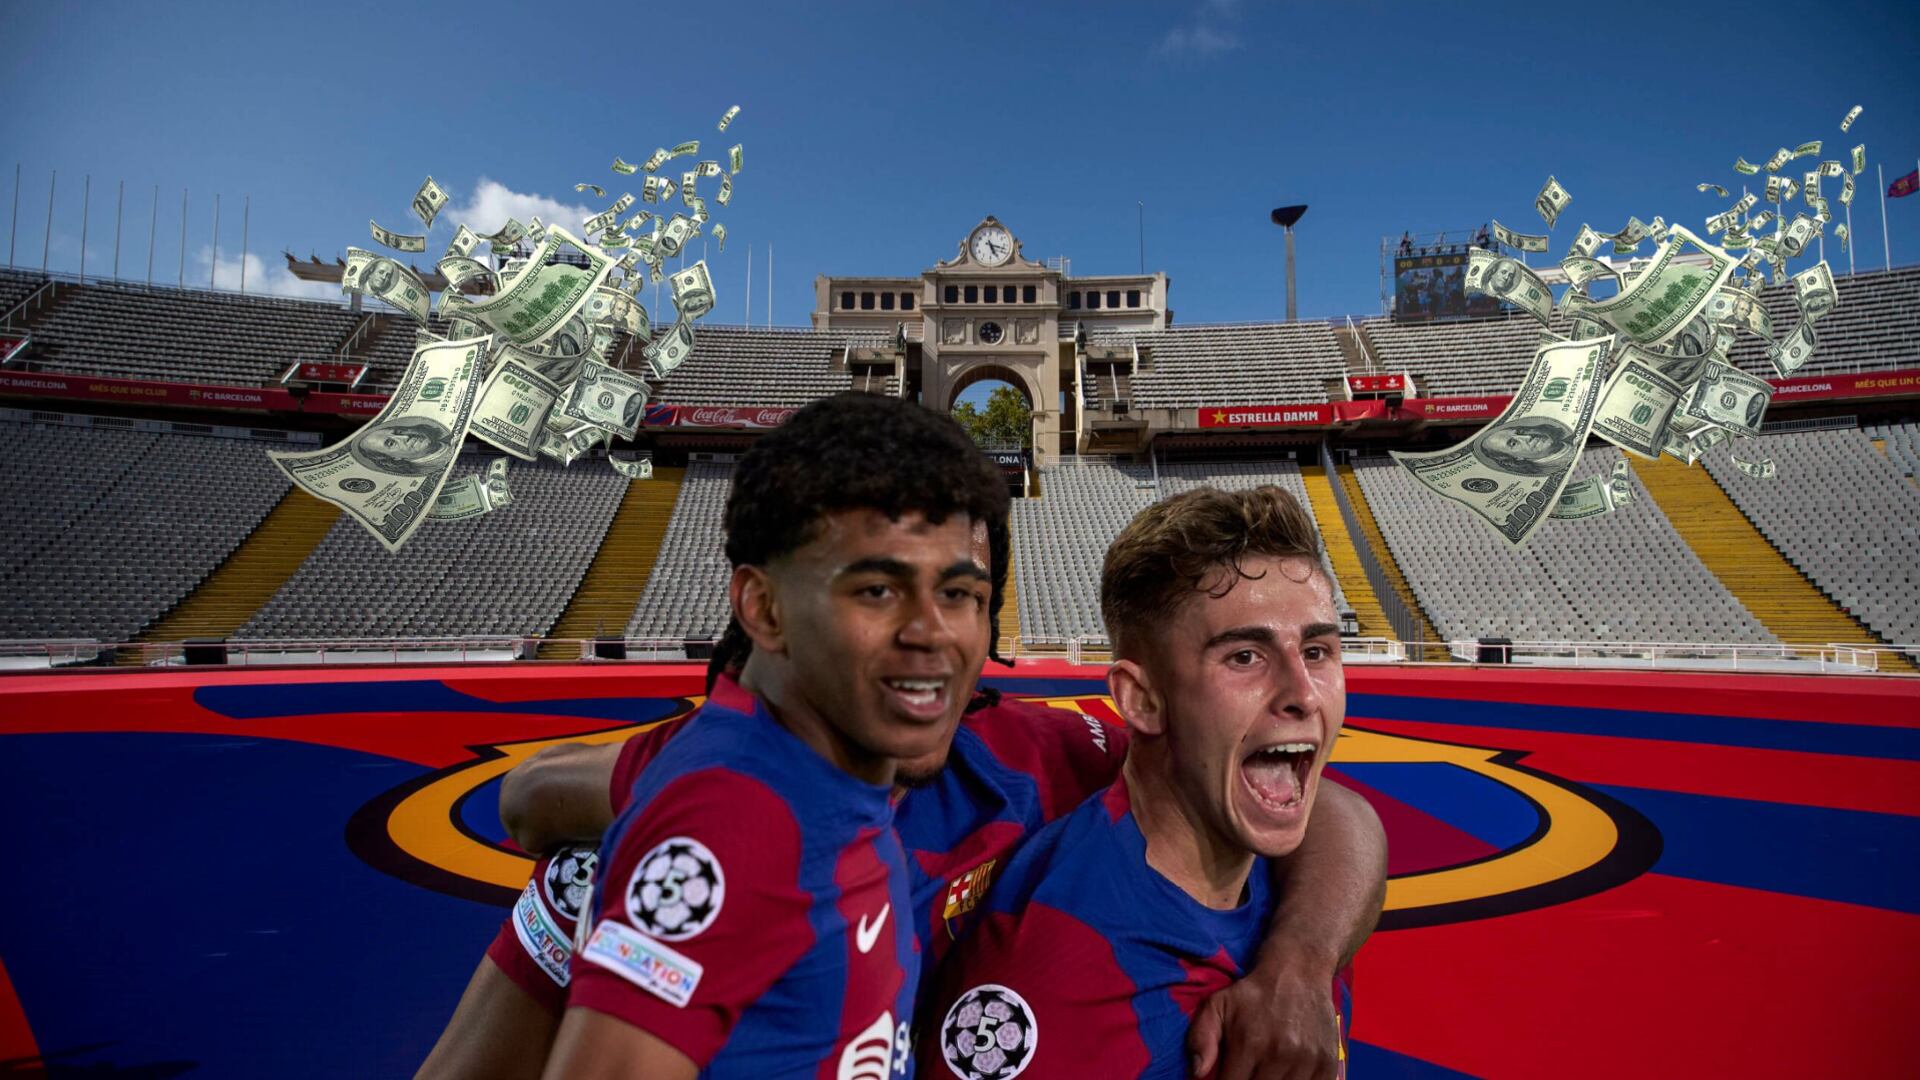 FC Barcelona's youngsters' value, Lopez is worth $16M, this is Yamal's value